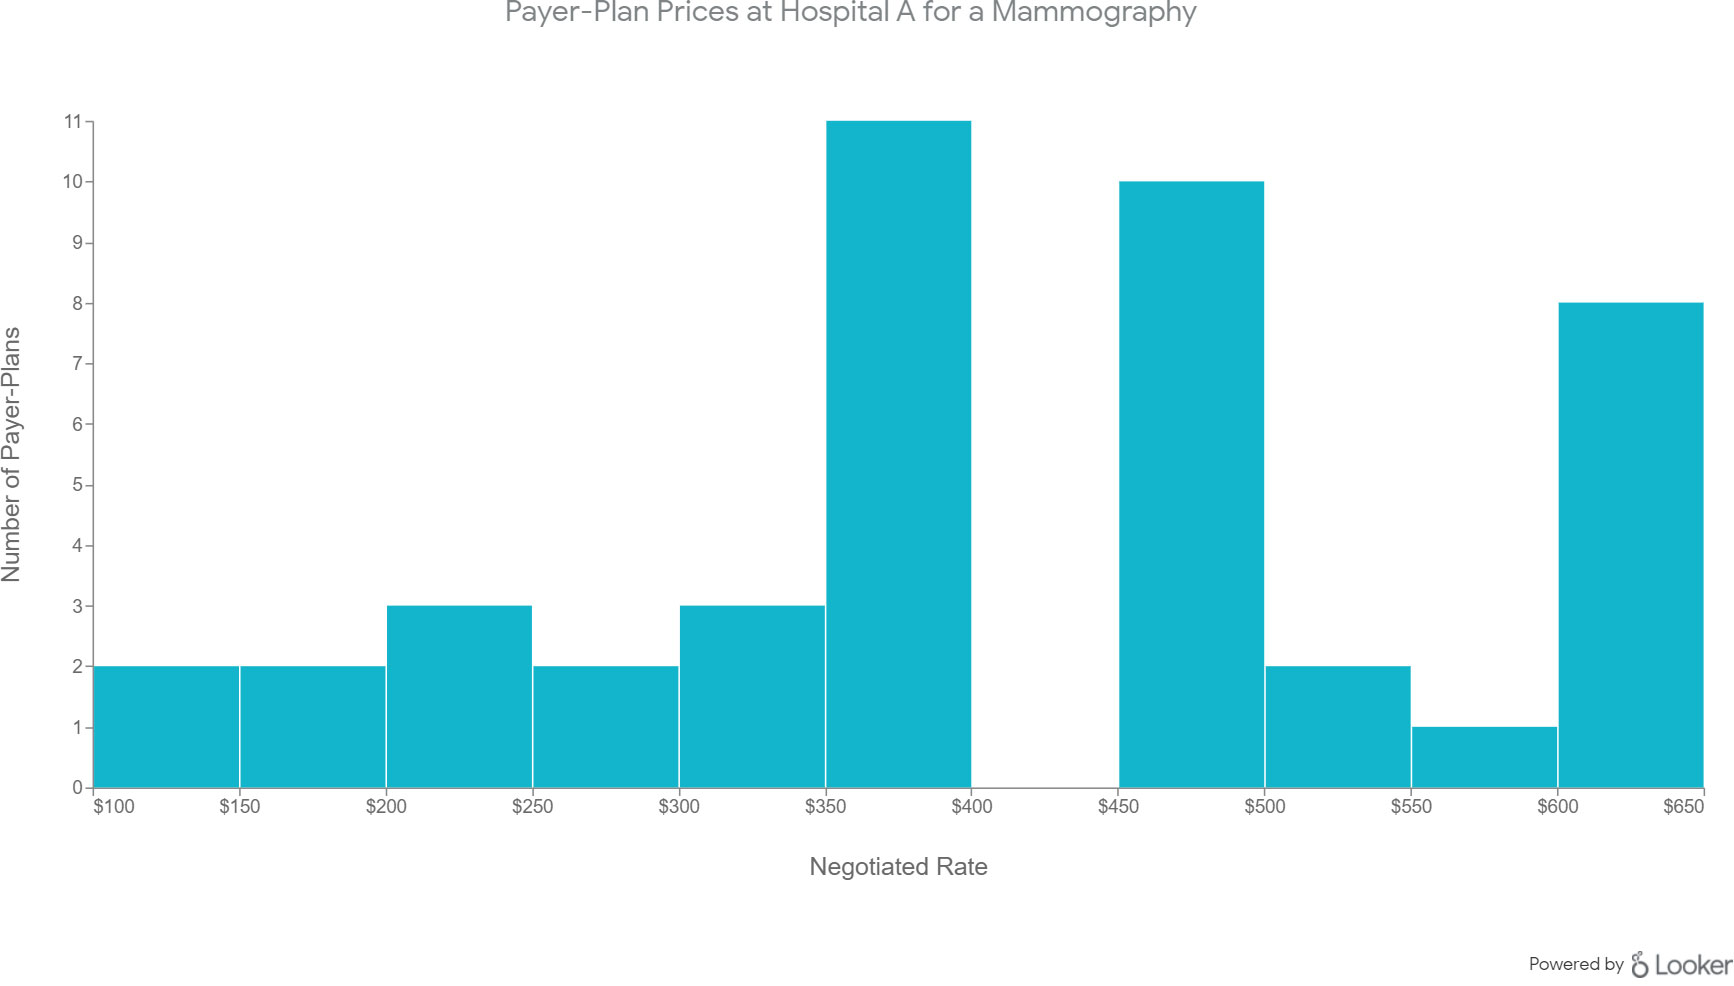 Payer-Plan Prices at Hospital A for a Mammography